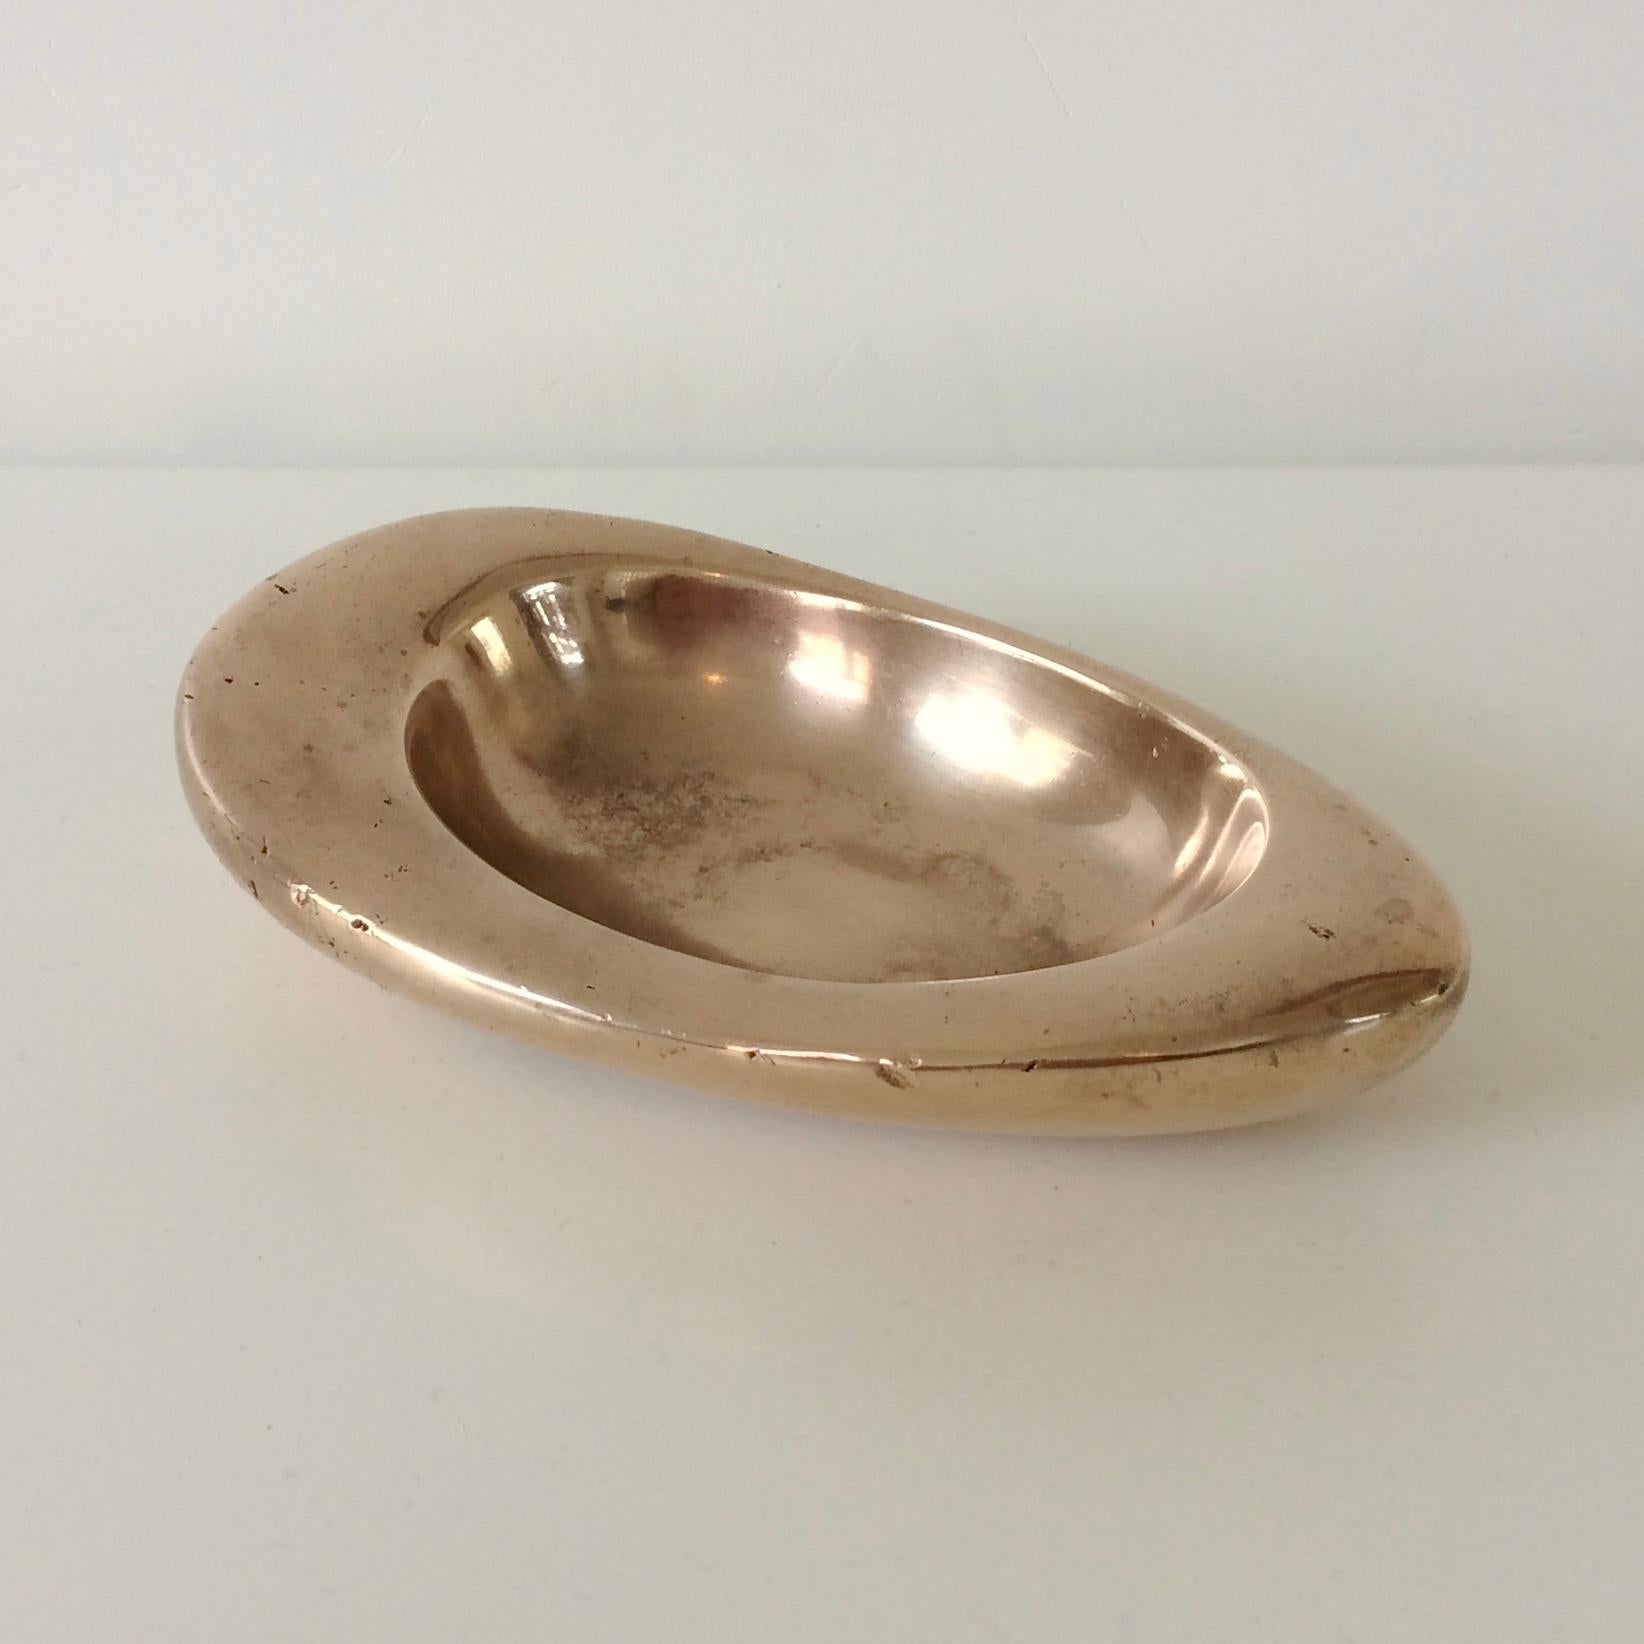 Nice Monique Gerber free-form vide-poche, circa 1970, France.
Polished gilt bronze. Signed M.G 
Dimensions: 15 cm W, 9 cm D, 4 cm H.
All purchases are covered by our Buyer Protection Guarantee.
This item can be returned within 7 days of delivery.